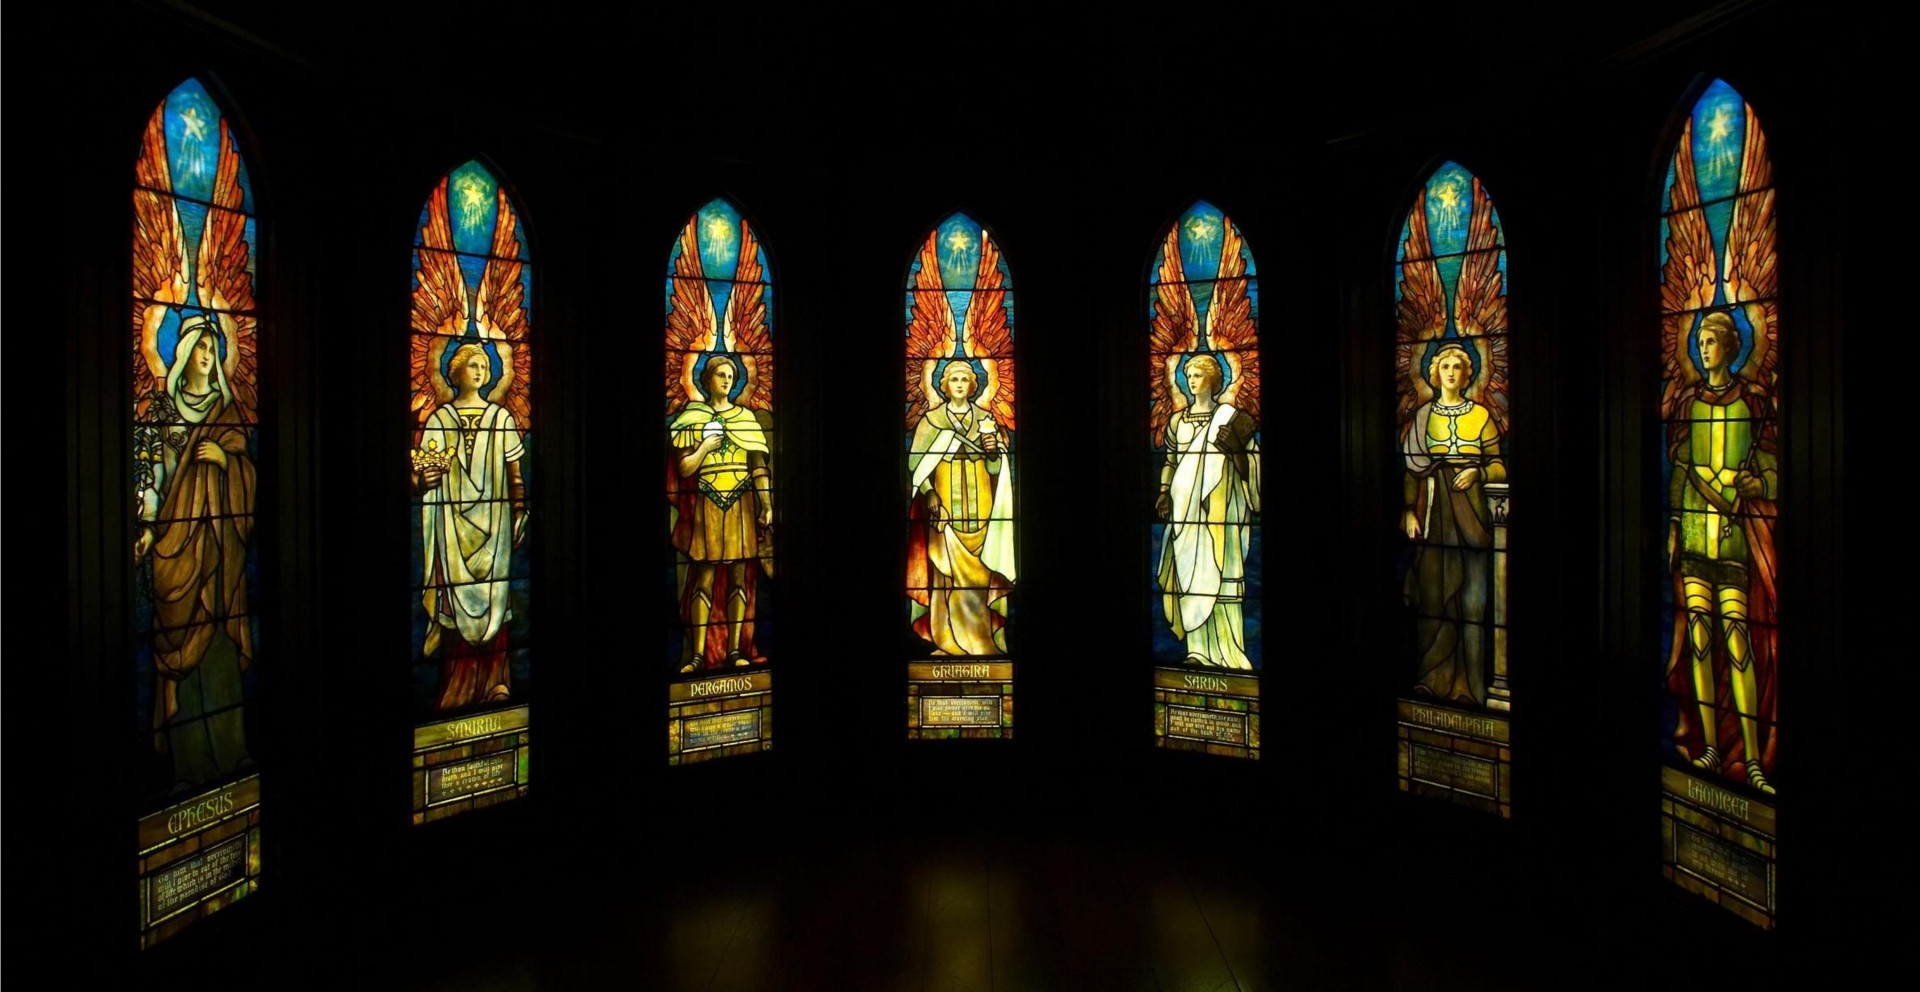 Angels in a semi[circle of stained glass windows